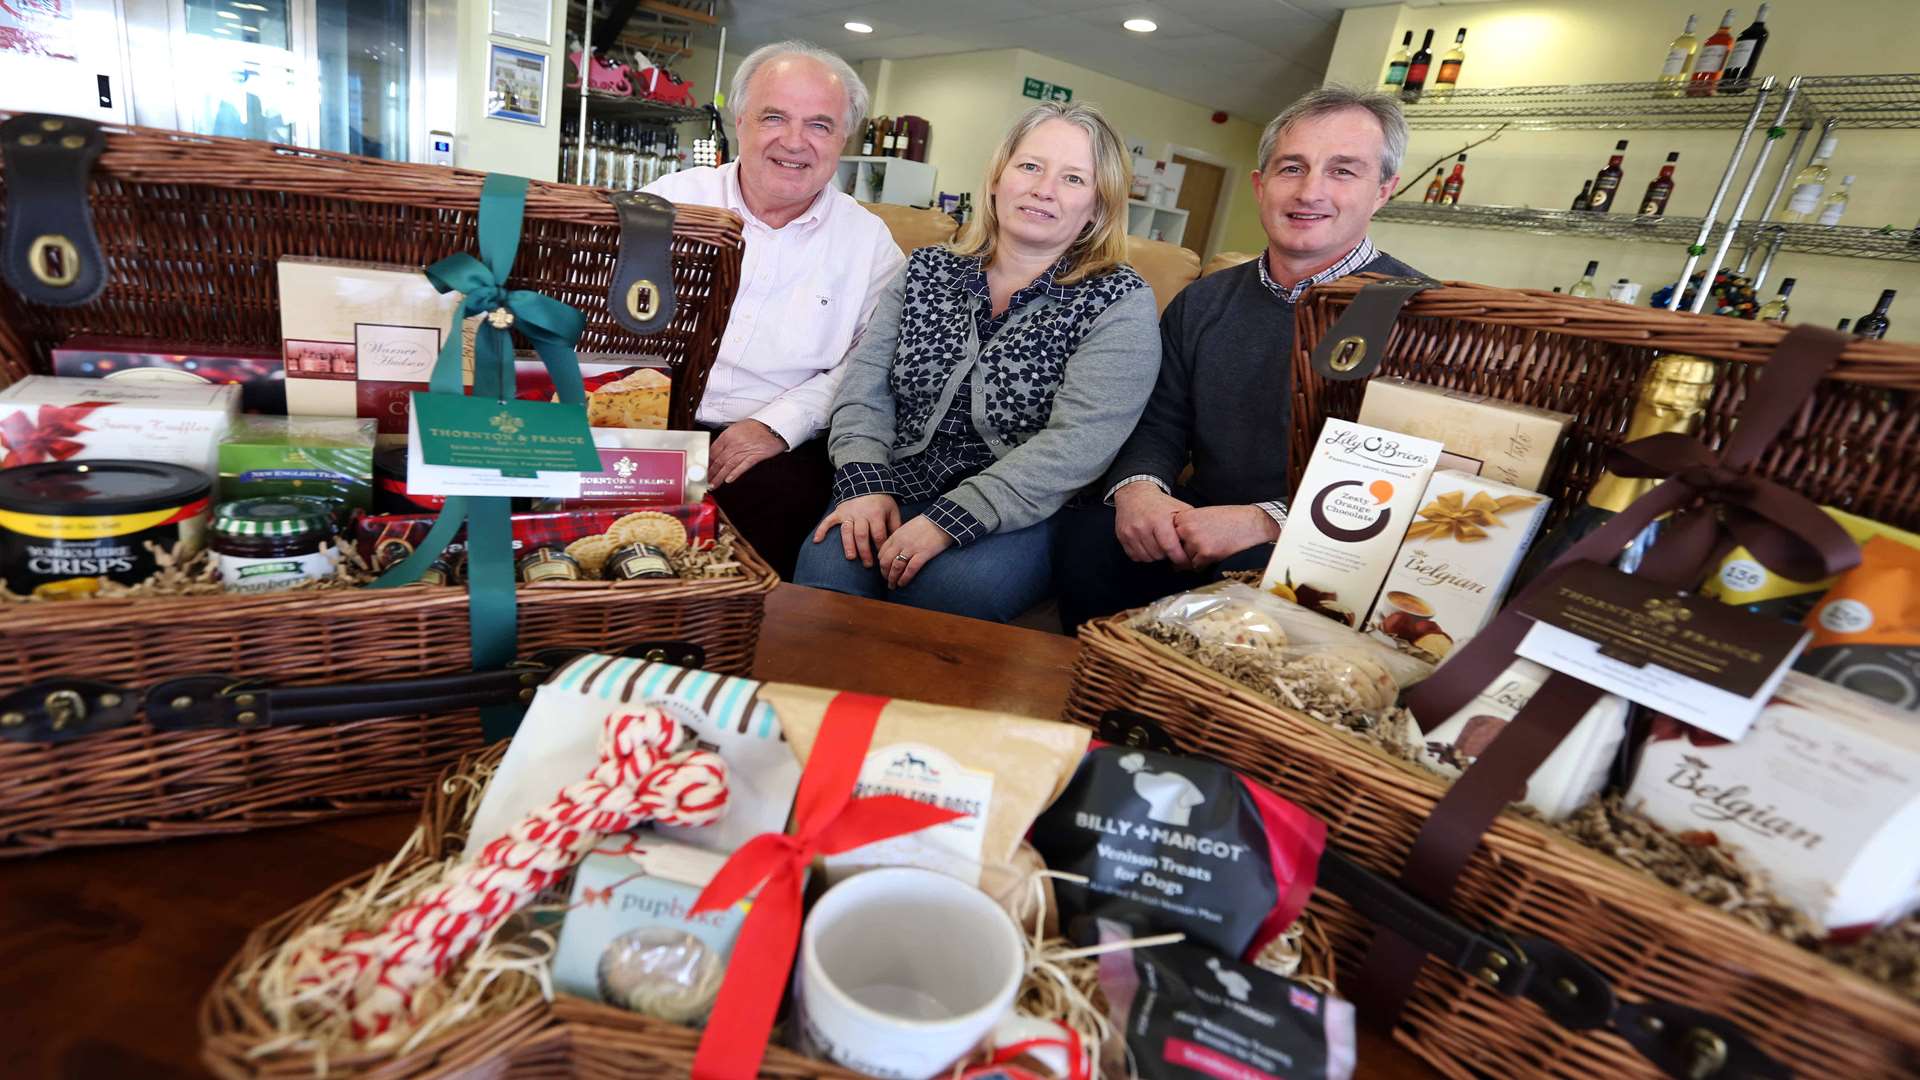 From left, Lanchester group of companies managing director Tony Cleary, Lanchester Gifts operations manager Ruth Peyton and Spicers of Hythe managing director Ian Spicer